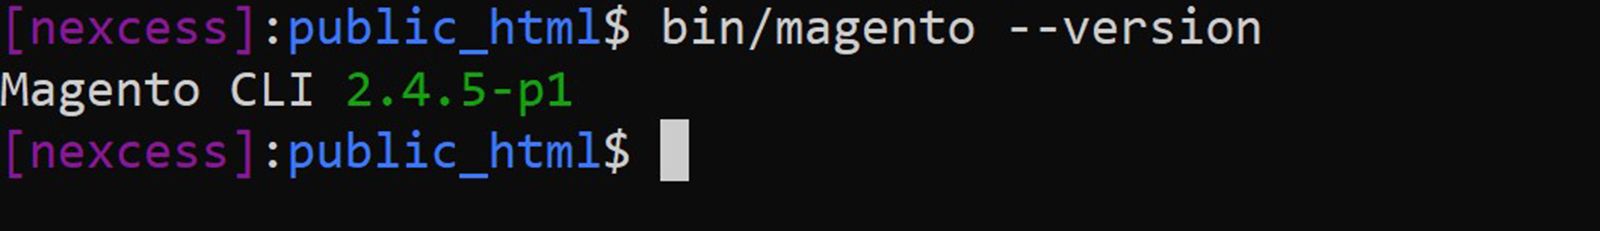 Screenshot of the CLI showing the output of the Magento version check command.